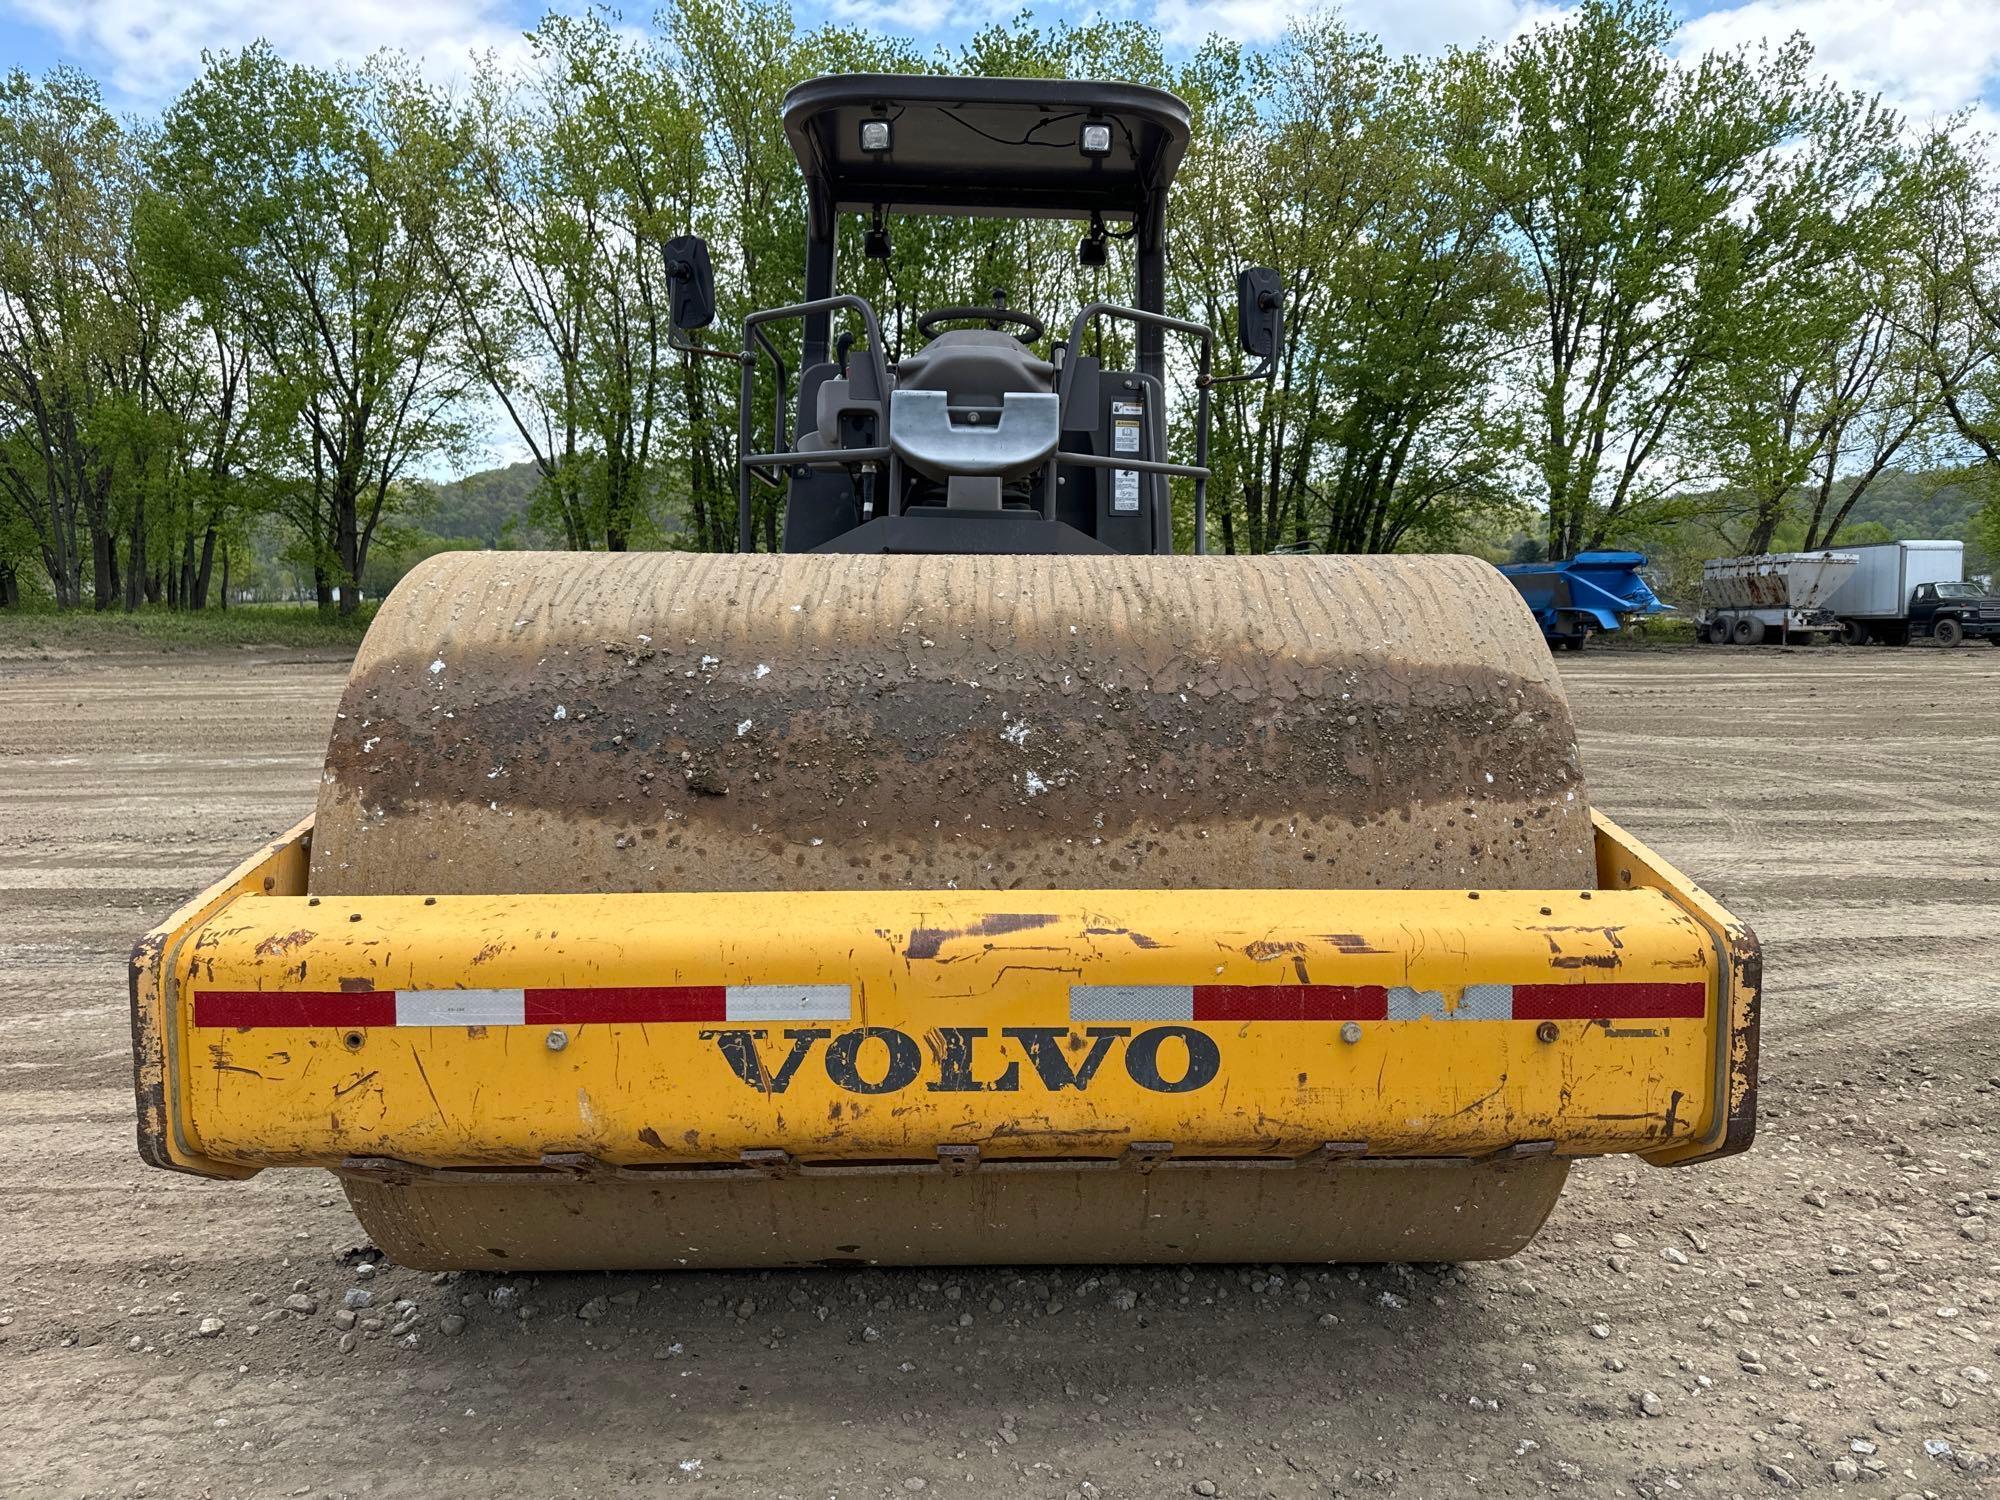 2014 VOLVO SD115 VIBRATORY ROLLER SN:235114 powered by Cummins diesel engine, equipped with OROPS,